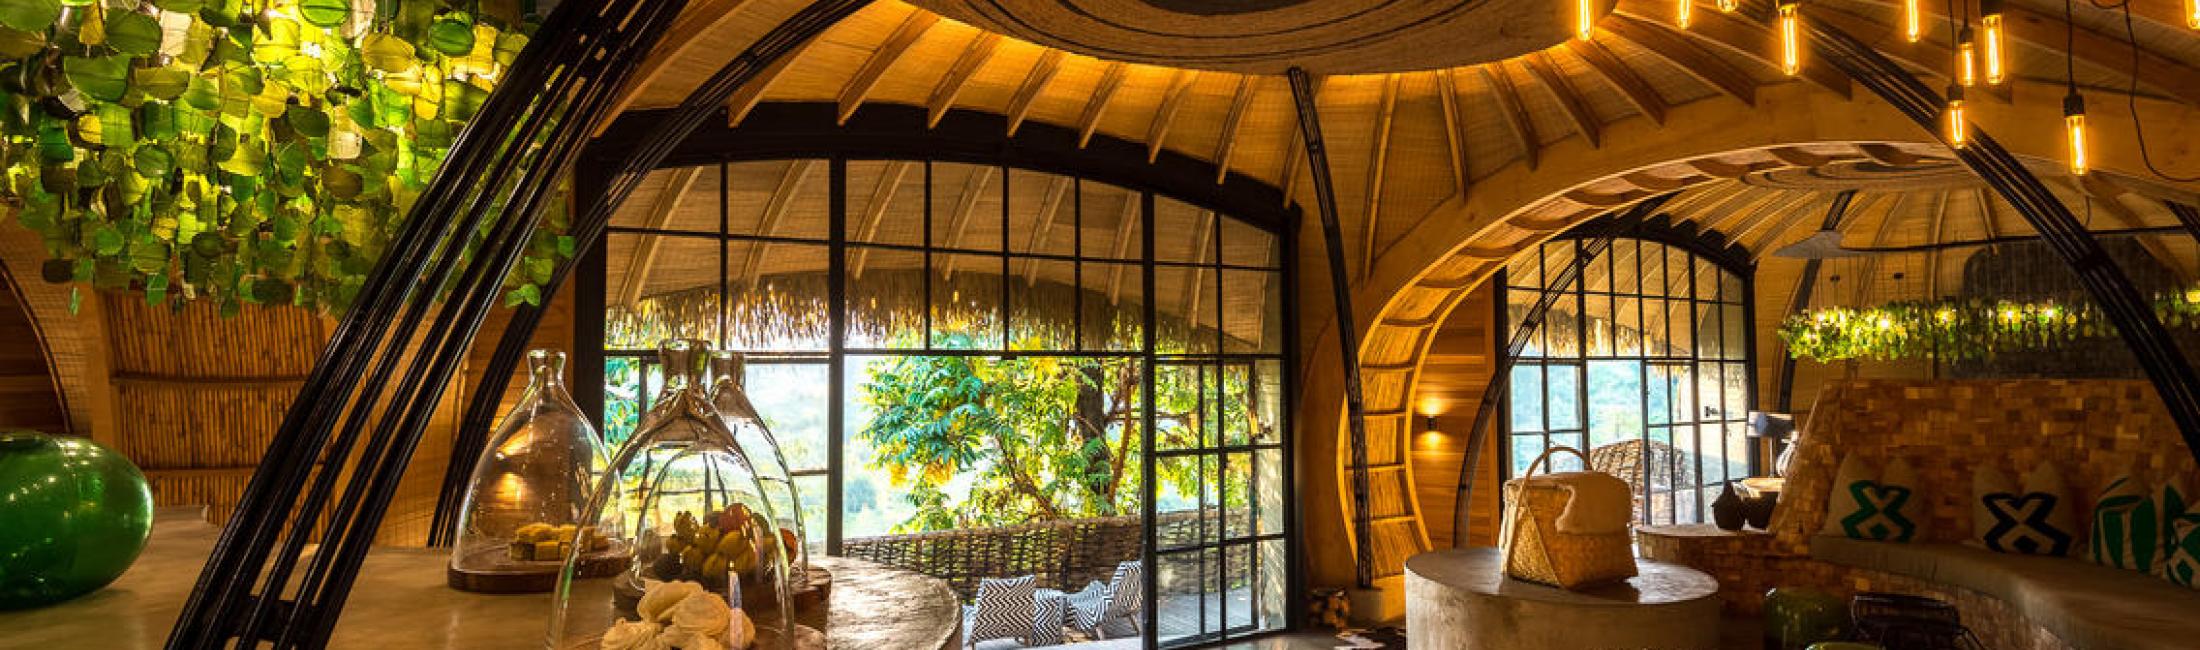 Interiors of Bisate Lodge pay homage to traditional Rwandan culture.